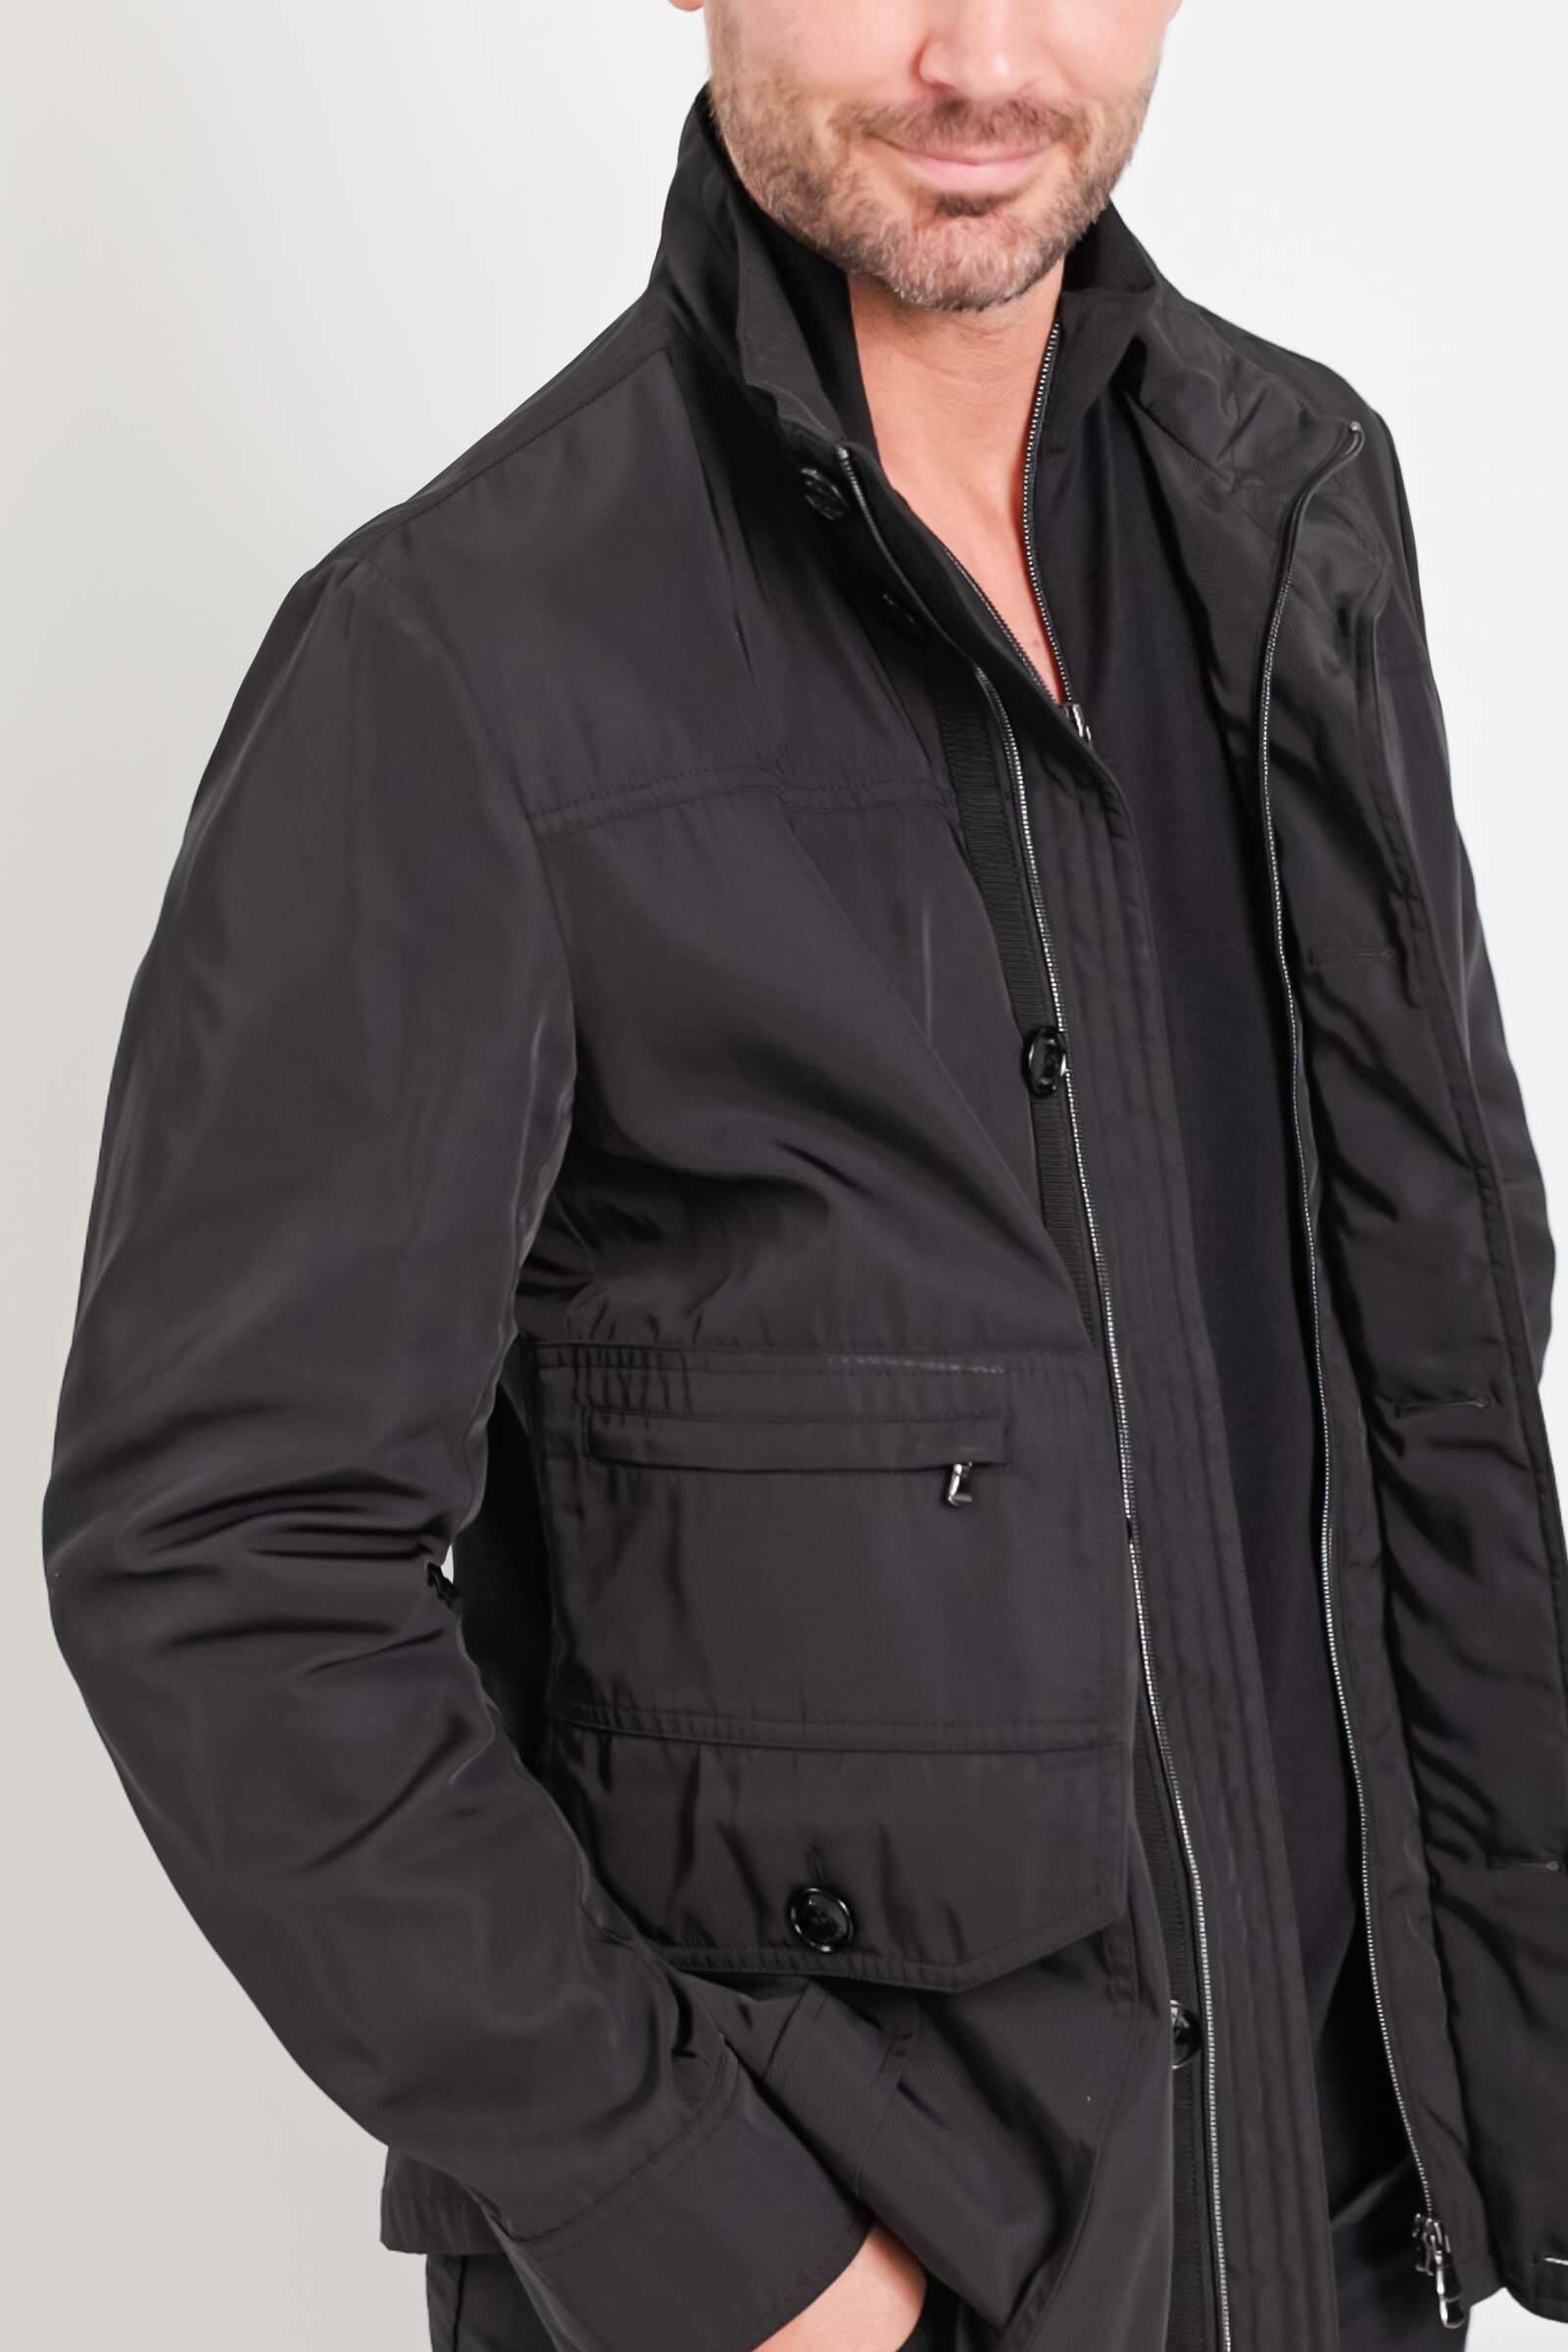 The Best Travel Jacket. Man Showing the Side Profile of a Men's Mike Jacket in Black.